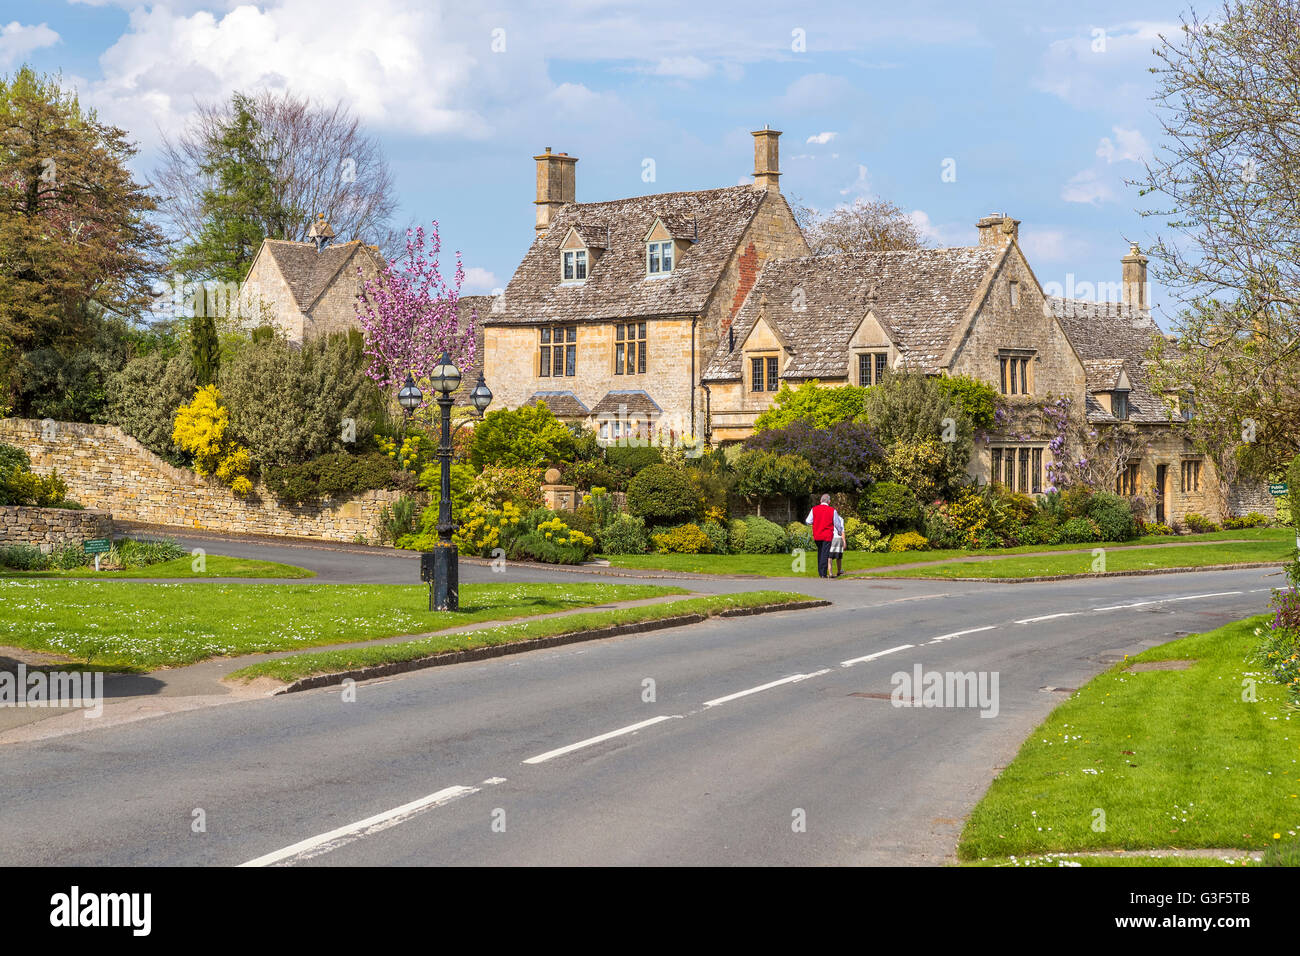 Chipping Campden, Cotswold, Gloucestershire, England, United Kingdom, Europe. Stock Photo